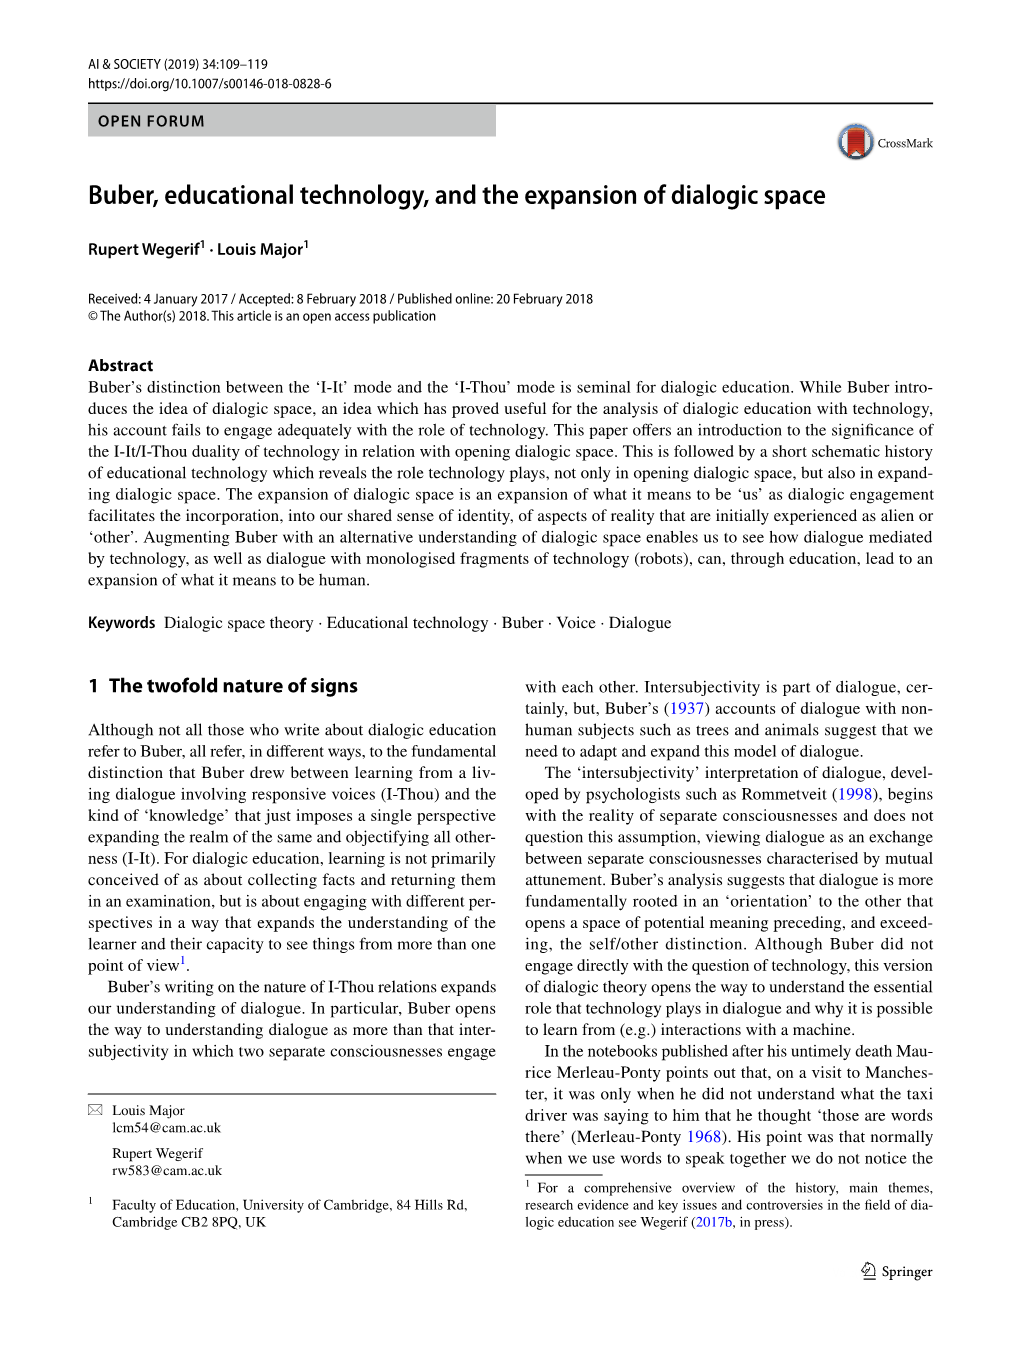 Buber, Educational Technology, and the Expansion of Dialogic Space